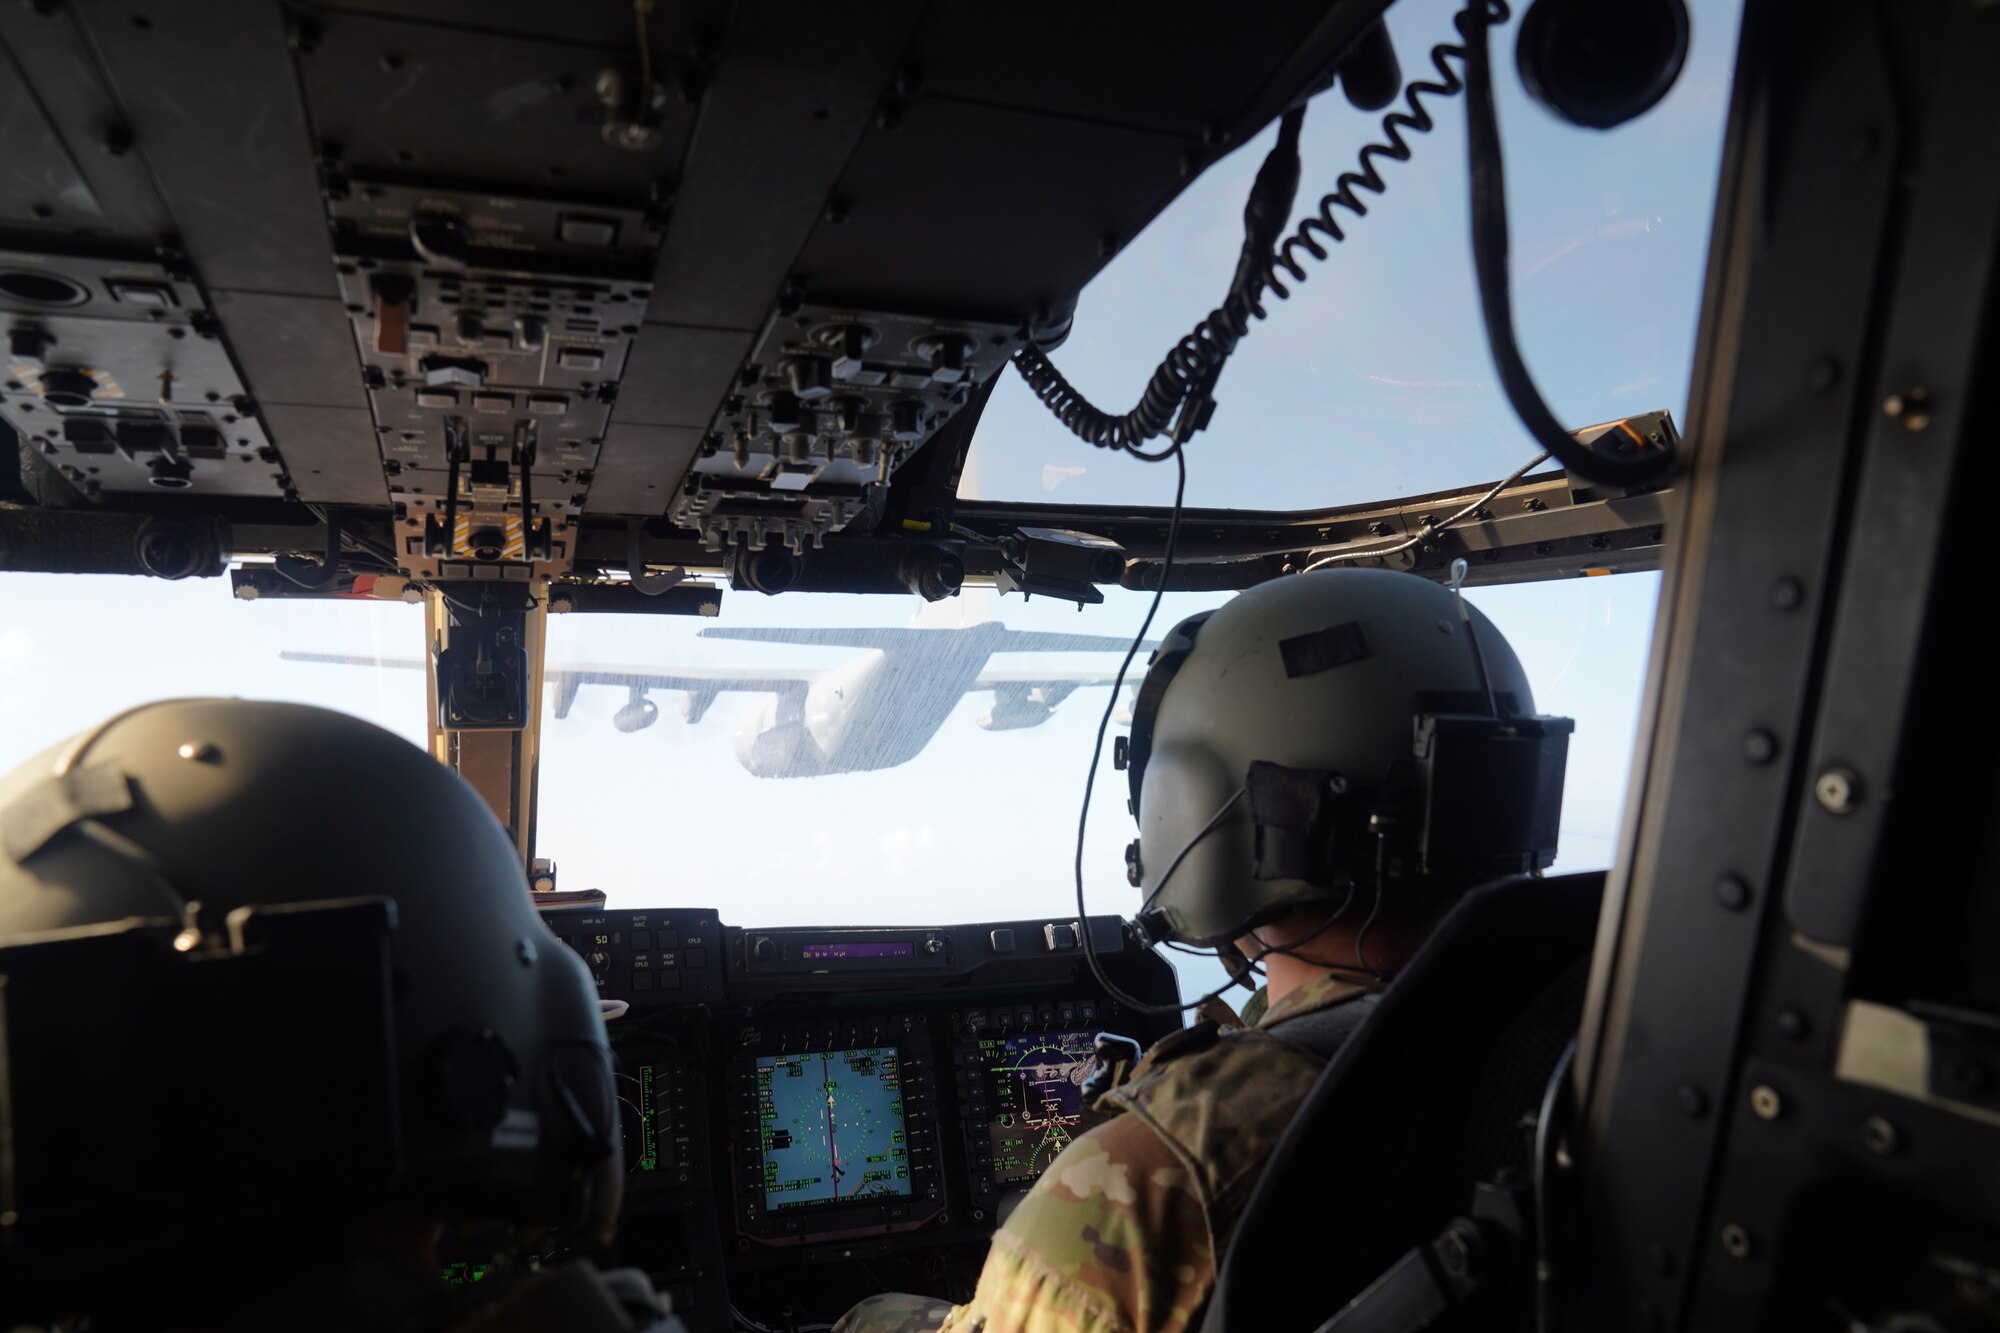 Airmen with the 21st Special Operations Squadron prepare to conduct tactical air-to-air refueling during search and rescue training off the coast of Okinawa, Japan, Nov. 19, 2020.